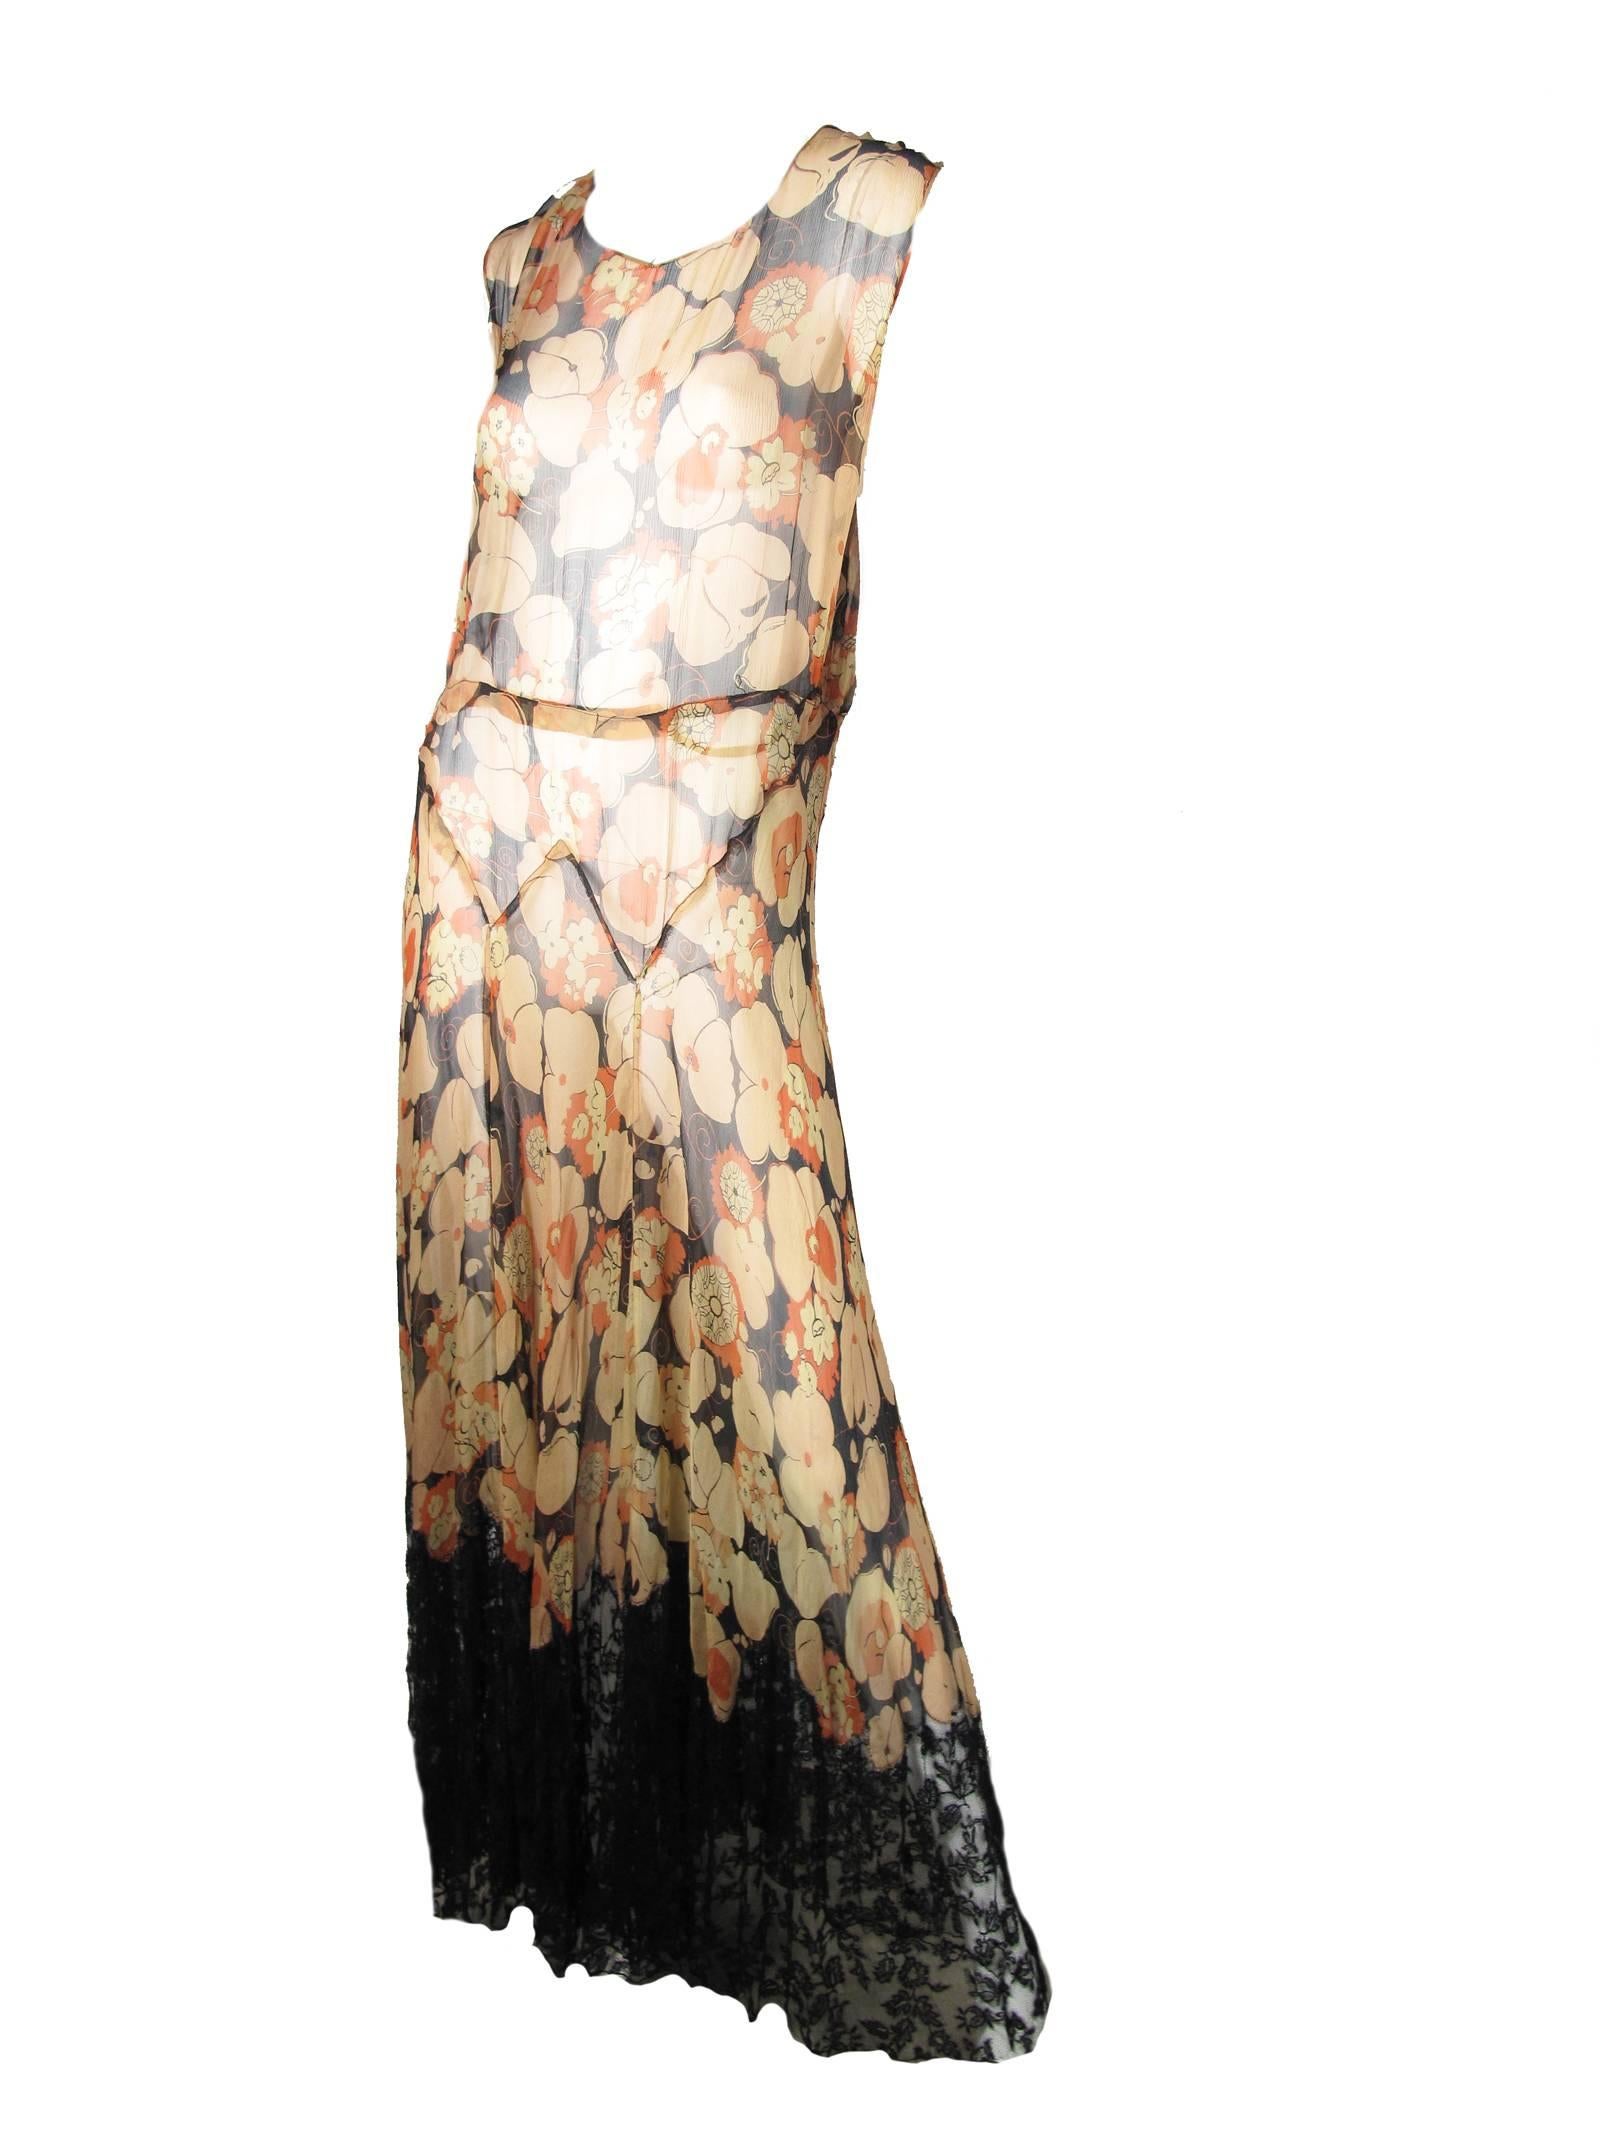 1920s - 30s sheer chiffon floral gown with jacket and lace trim.  Condition: AS IS, some seams of jacket and dress have come undone and some seams have been repaired by hand. Fabric is very fragile

Jacket: 44